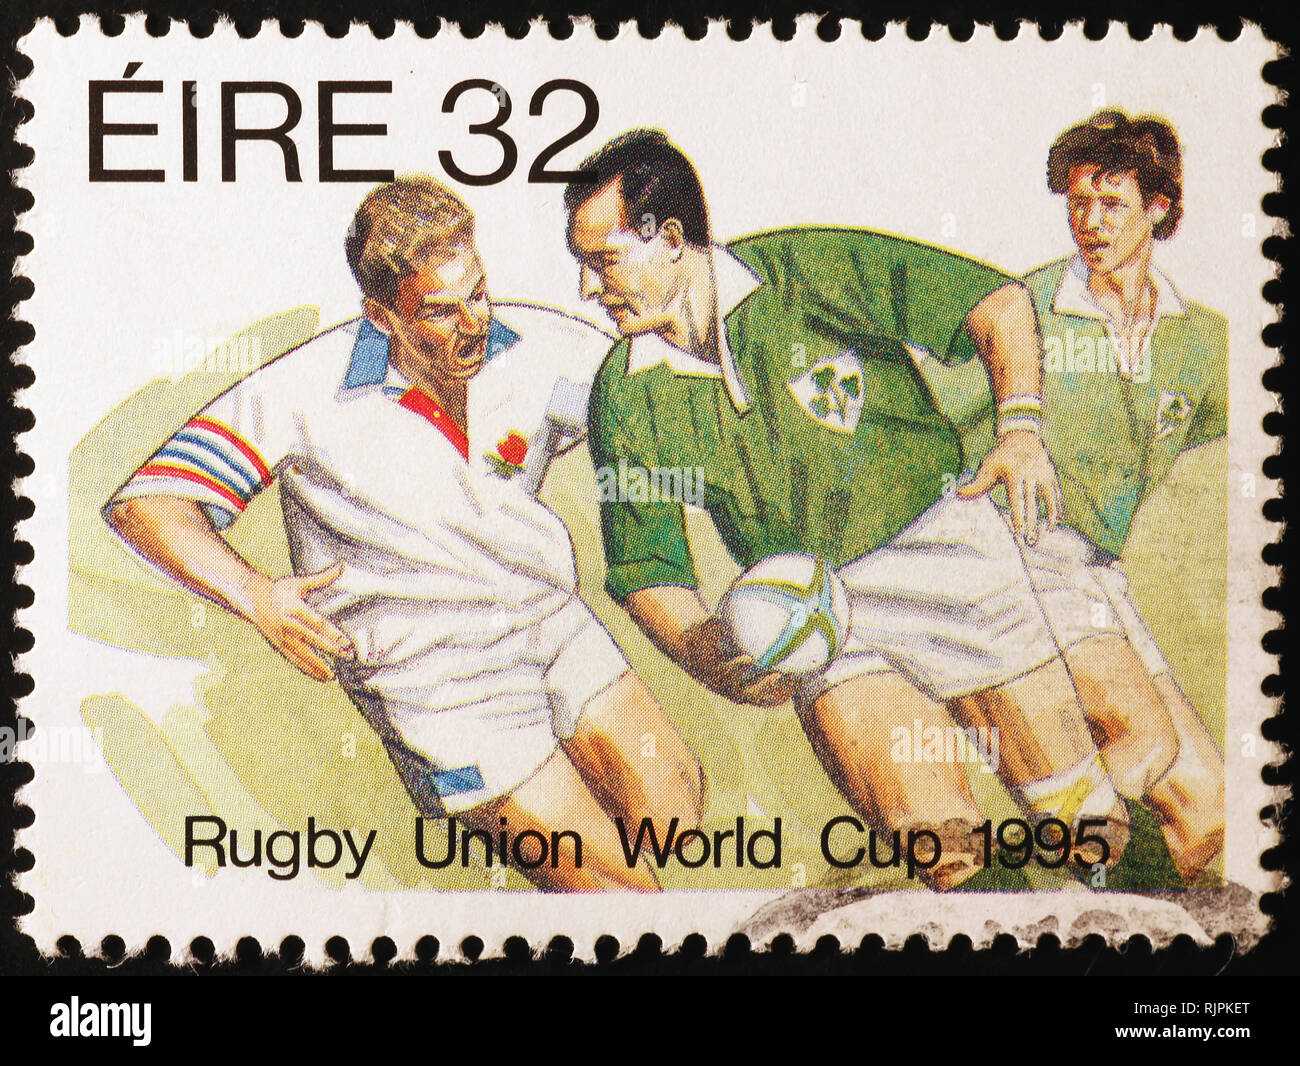 Irish national rugby team on postage stamp Stock Photo